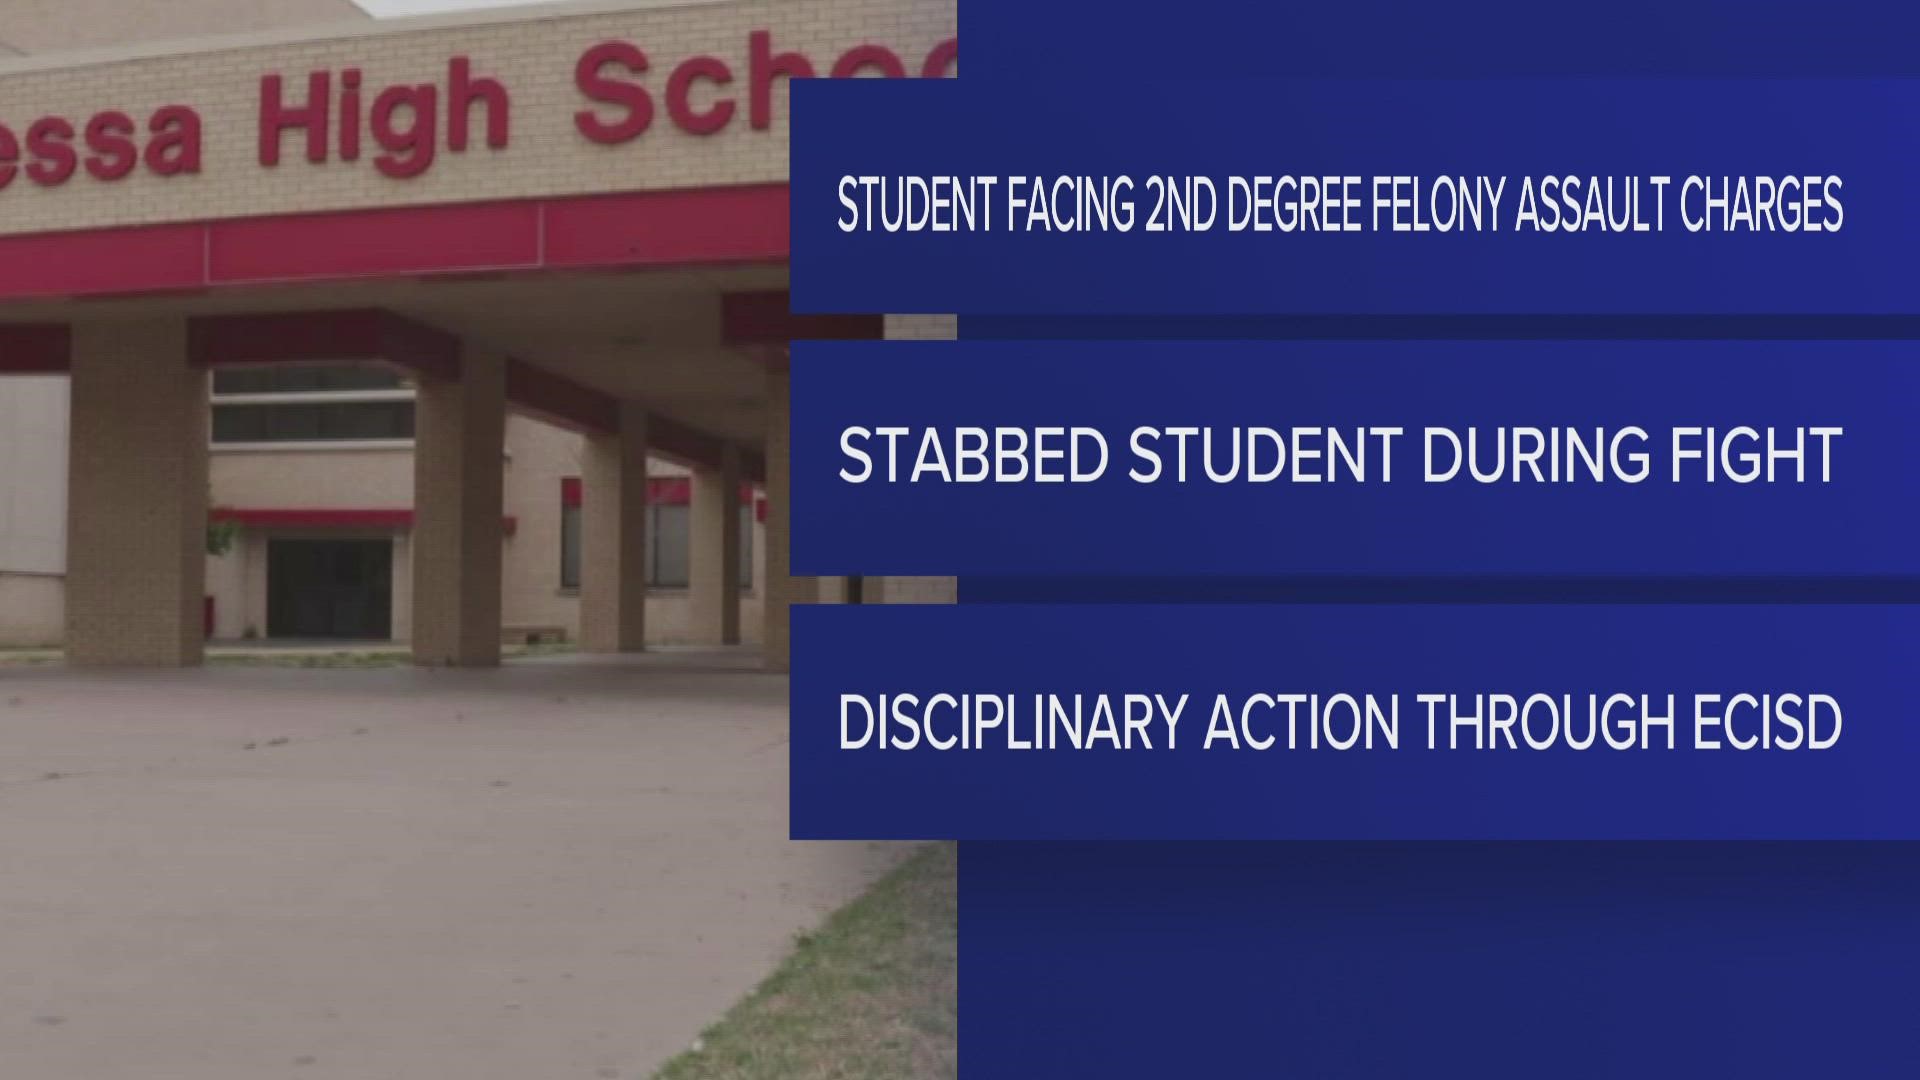 The student is facing a charge of aggravated assault with a deadly weapon, a 2nd degree felony.